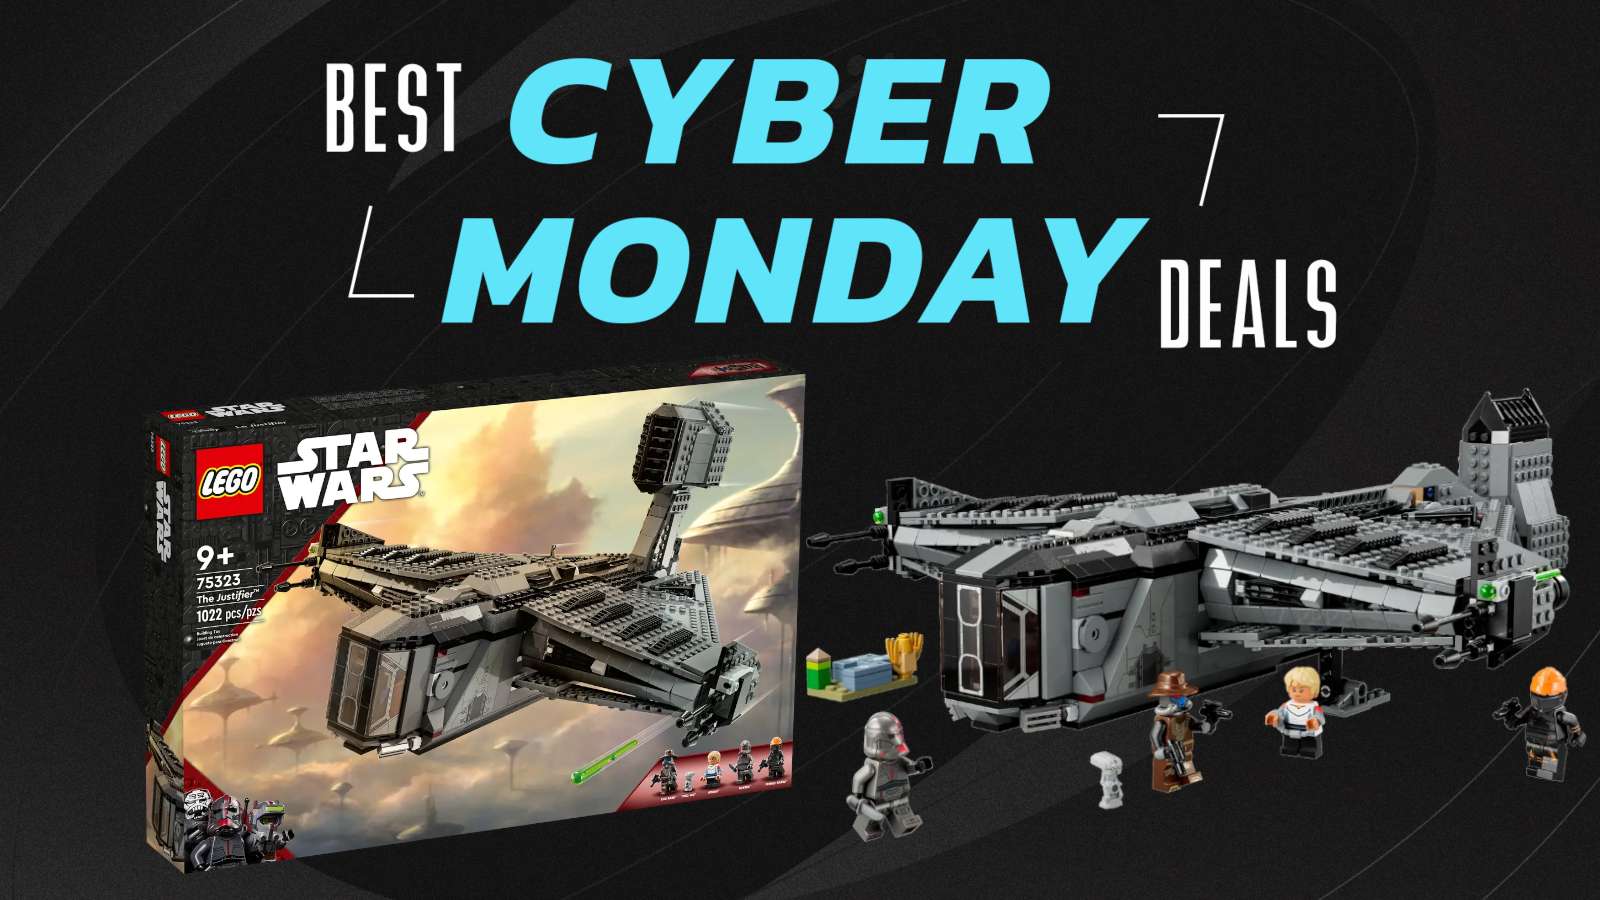 Cyber Monday Deals LEGO Star Wars the justifier Cover Image